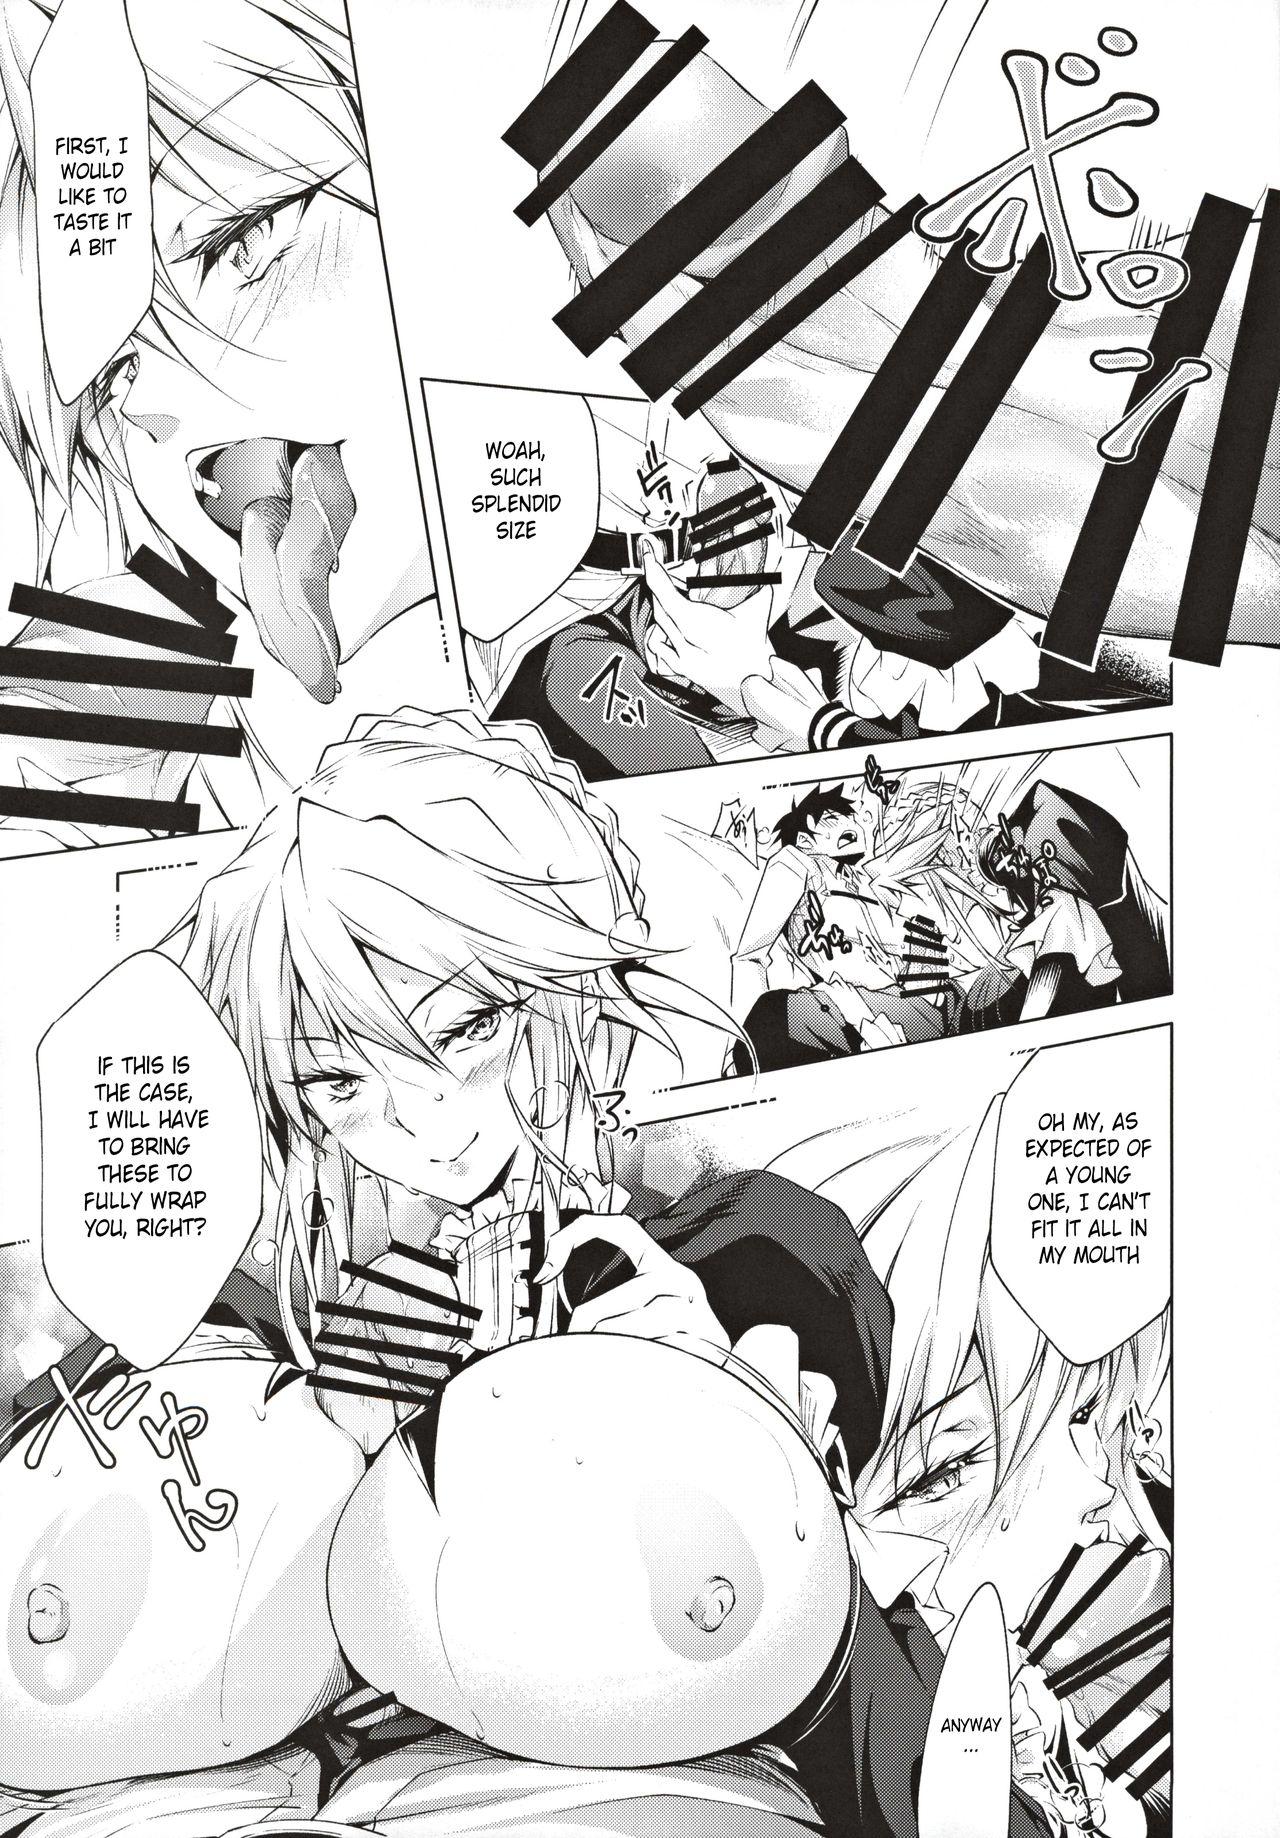 Curious Pendra Shimai no Seijijou | The Pendragon twin sisters' sexual situation - Fate grand order Hooker - Page 8